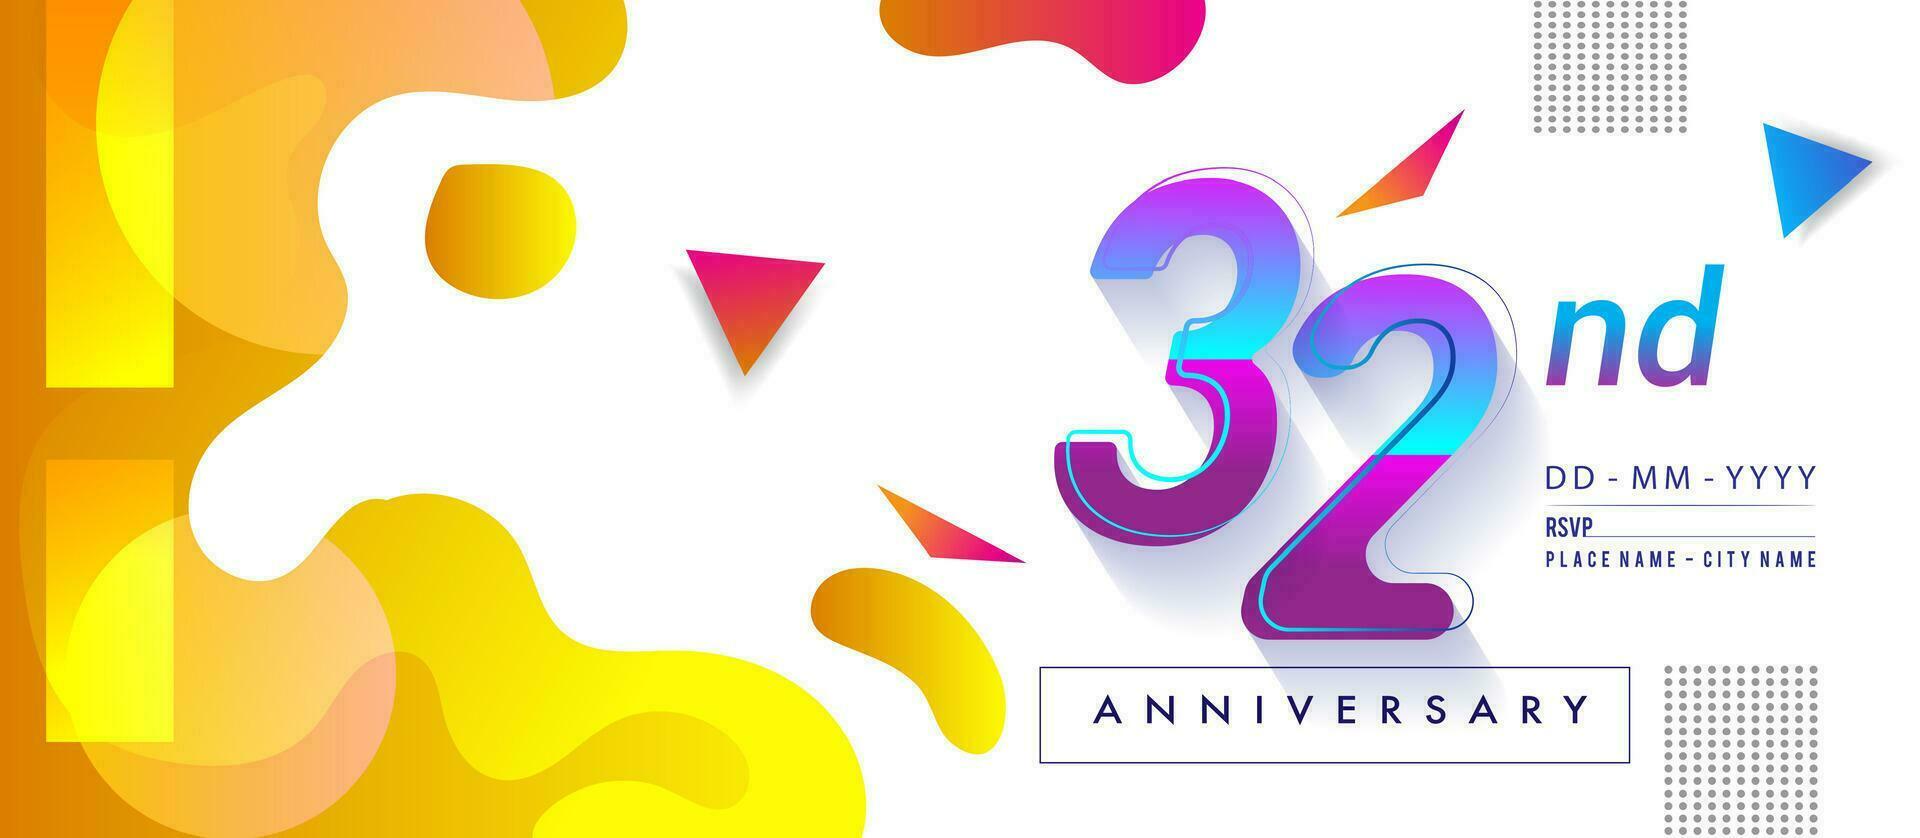 32nd years anniversary logo, vector design birthday celebration with colorful geometric background and circles shape.